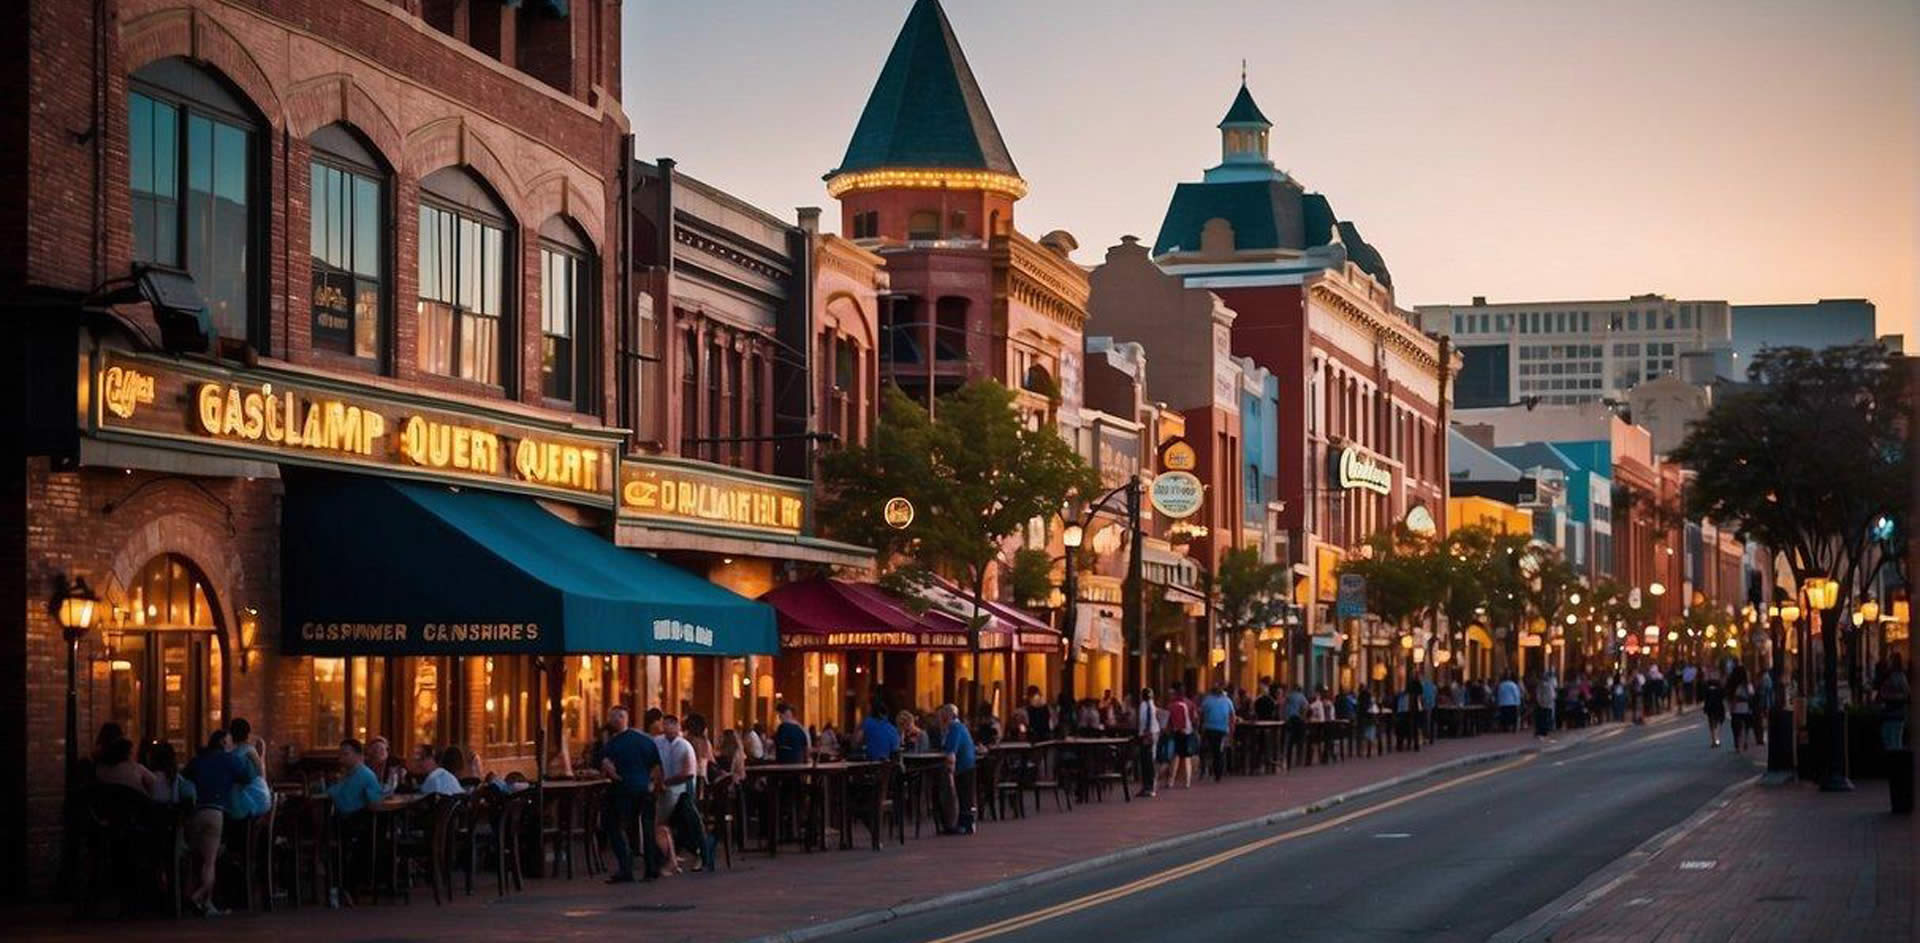 The Gaslamp Quarter bustles with vibrant nightlife, historic architecture, and bustling restaurants. The iconic Gaslamp Quarter sign shines brightly as people explore the bustling streets lined with lively bars and shop